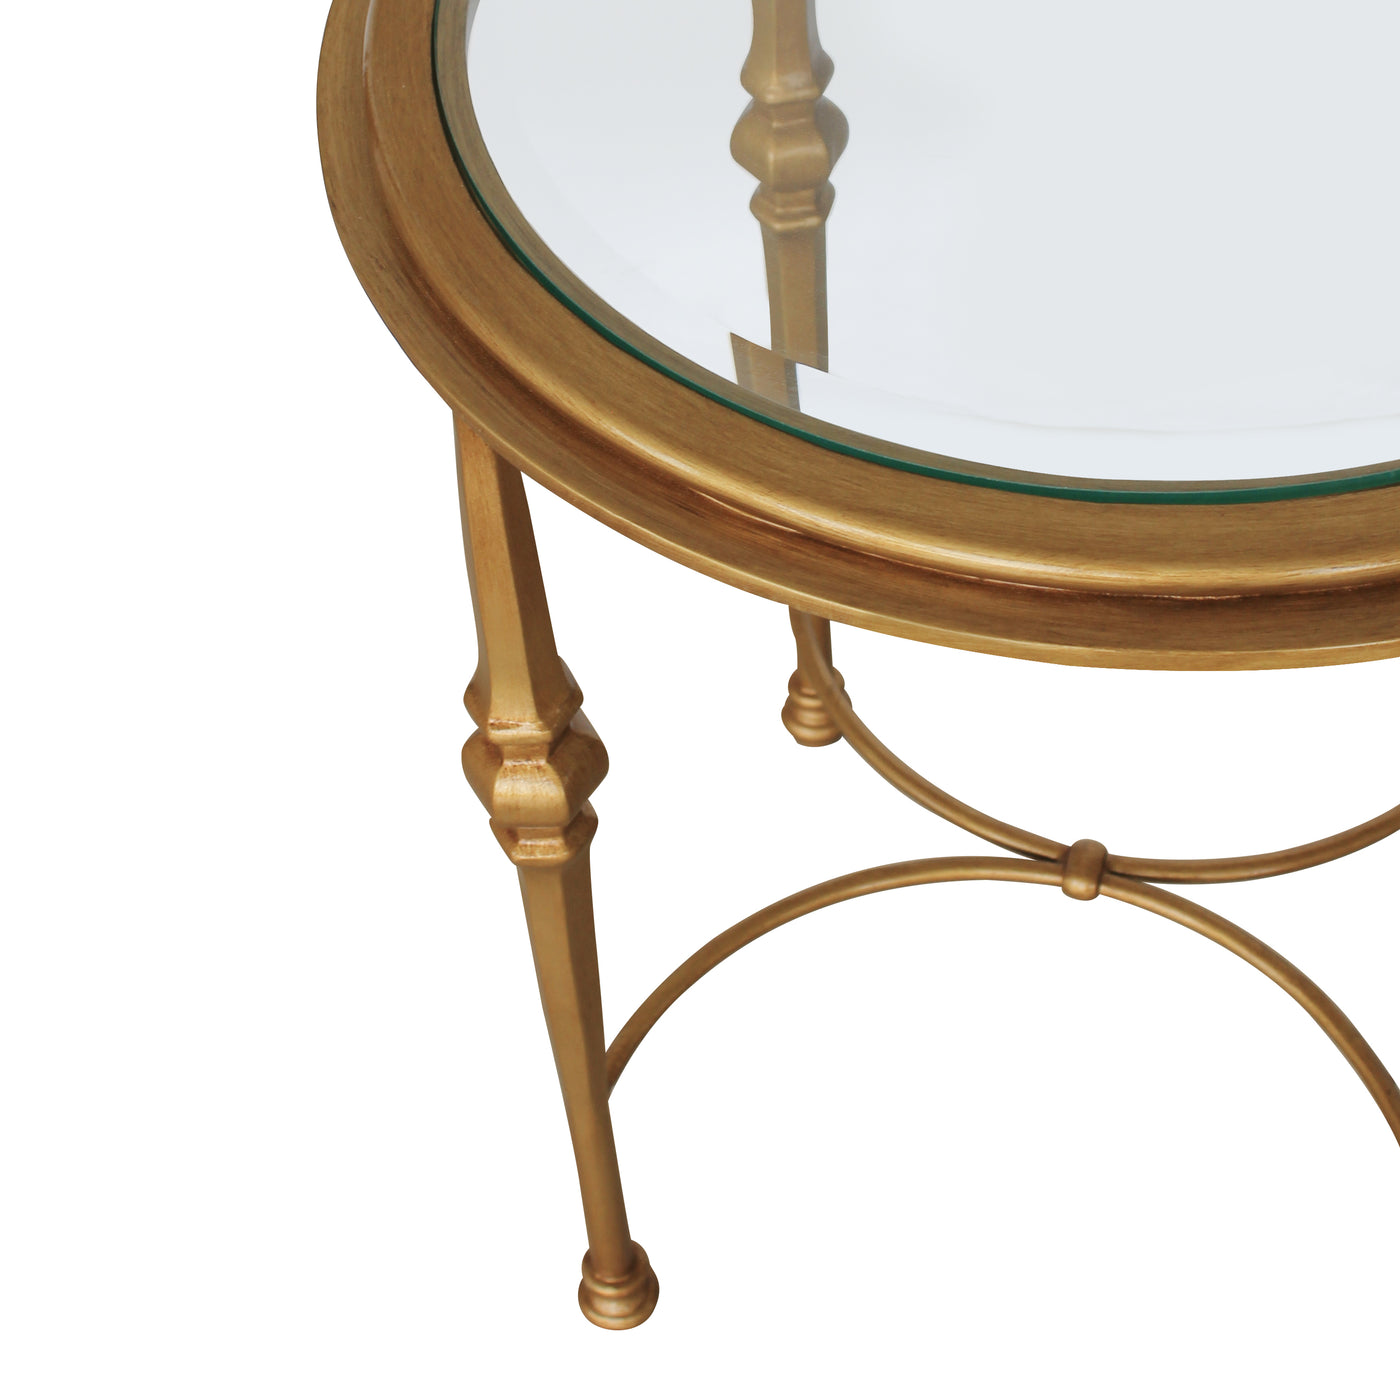 Close up of a classical round end table with glass top painted in antique gold finish